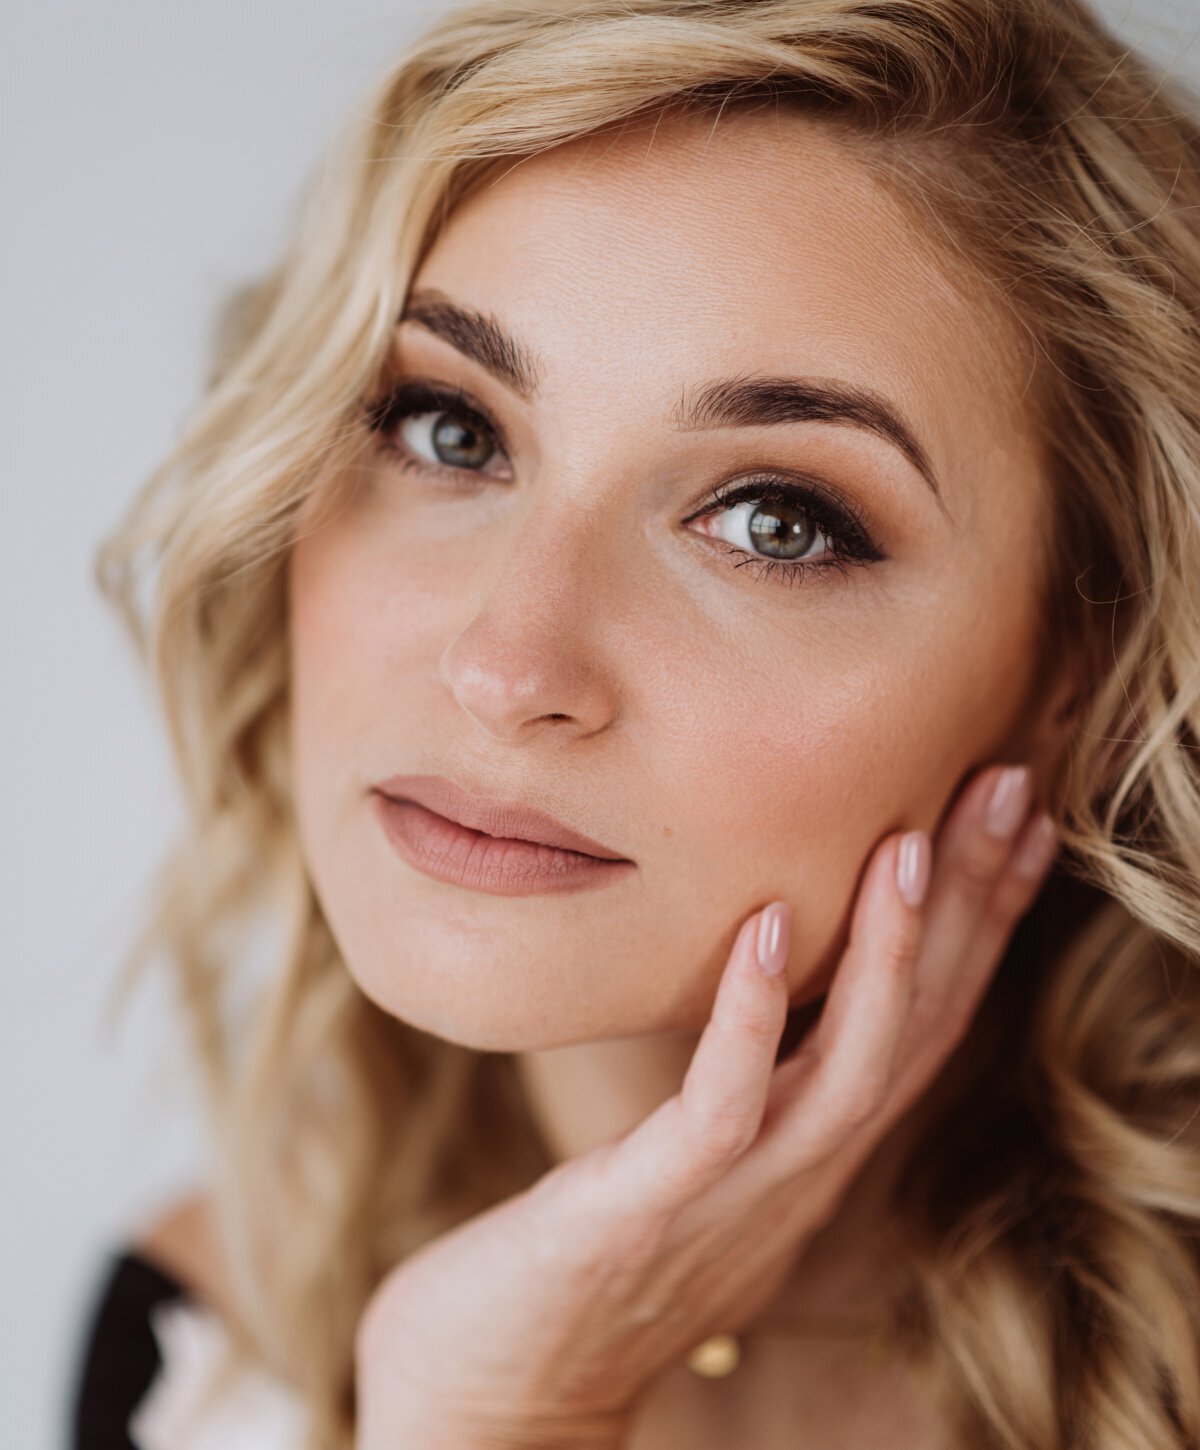 Virginia Beach Dermal Fillers model with blonde hair and hand on face